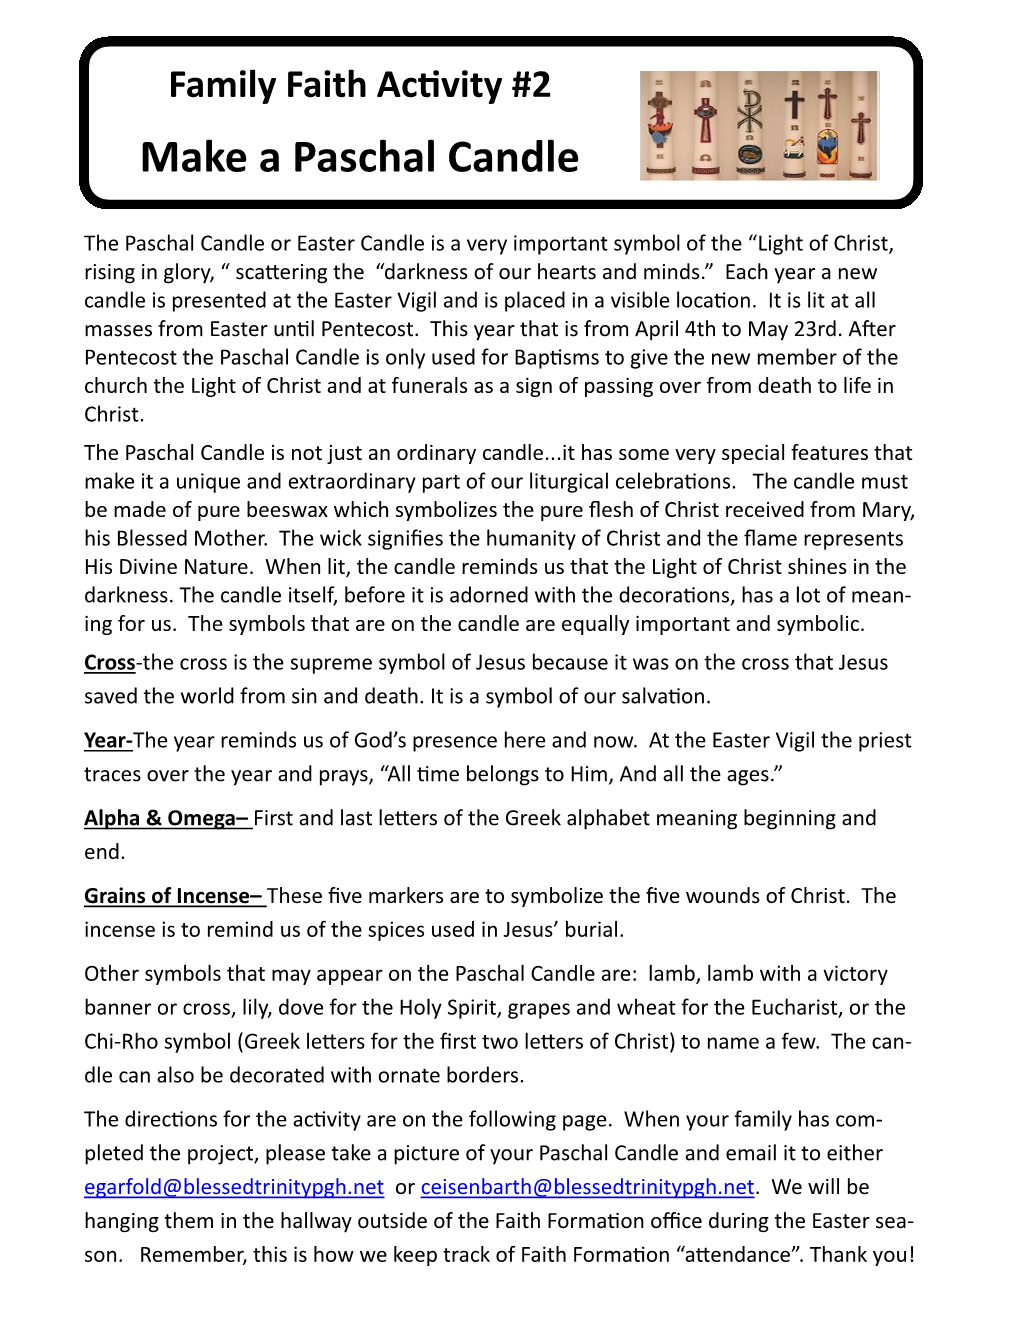 Make a Paschal Candle